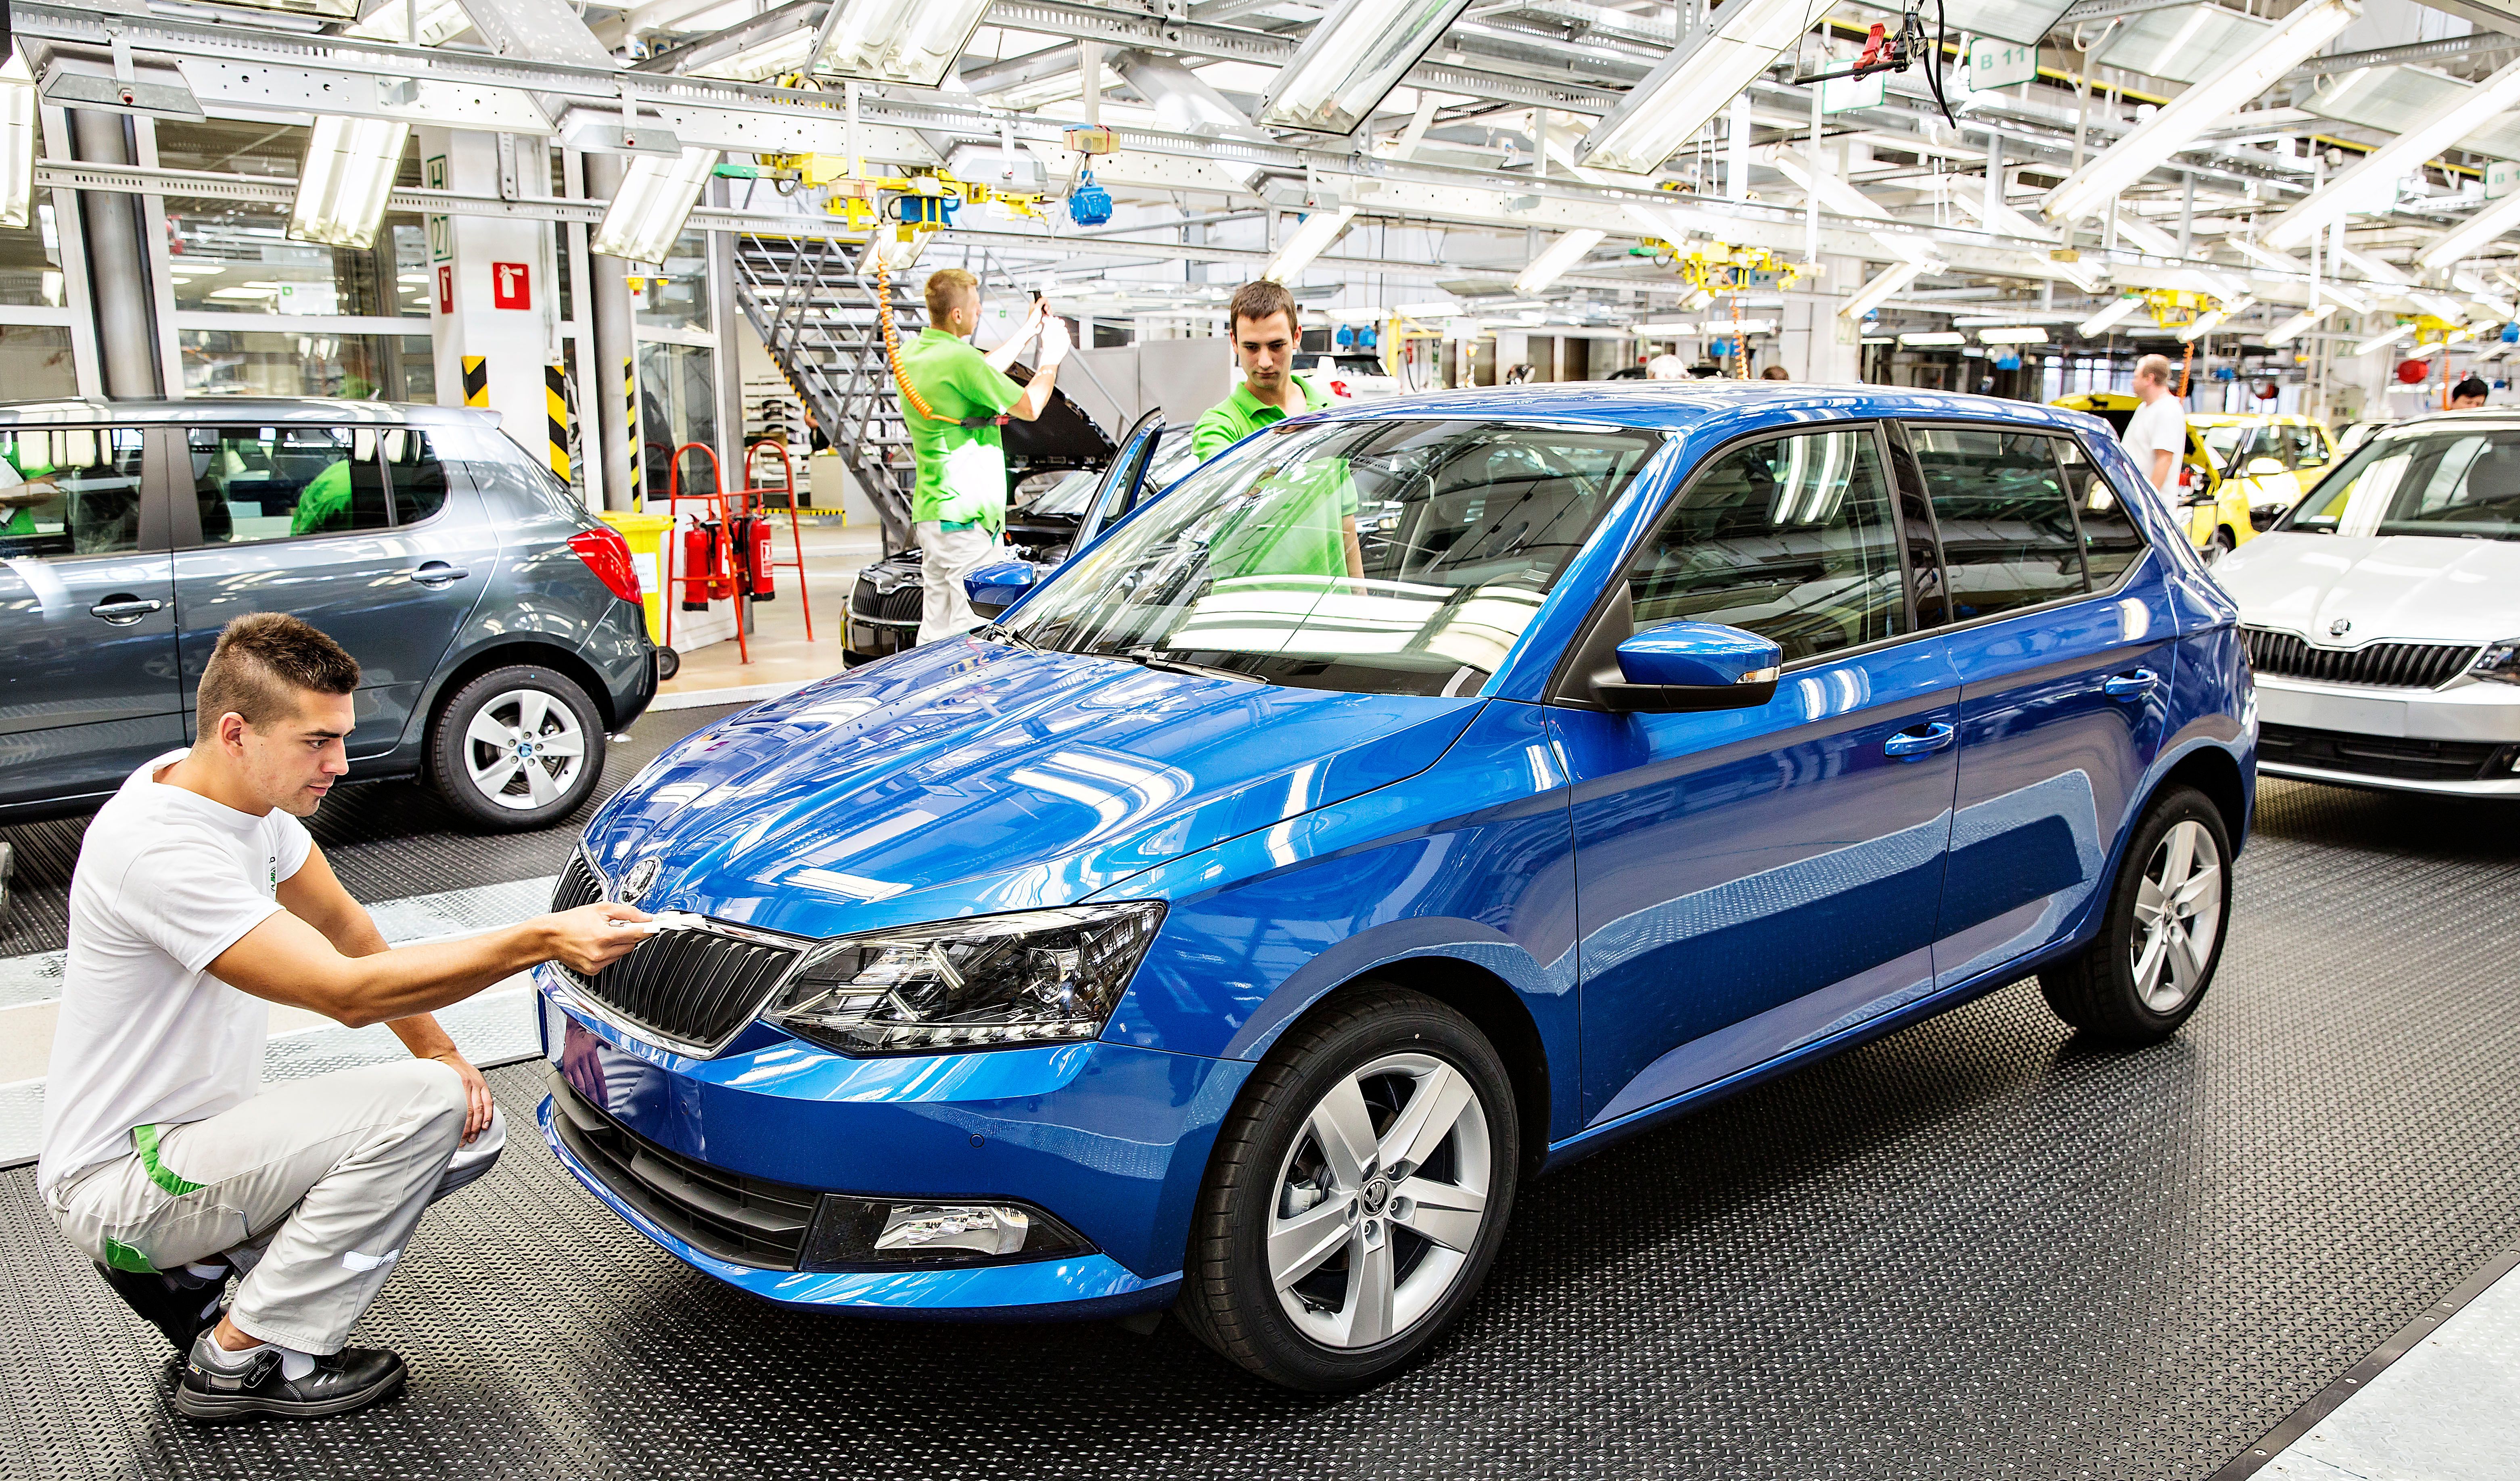 Skoda To Reach 1 million Sales in 2014 For First Time in Brands 119 Years History!